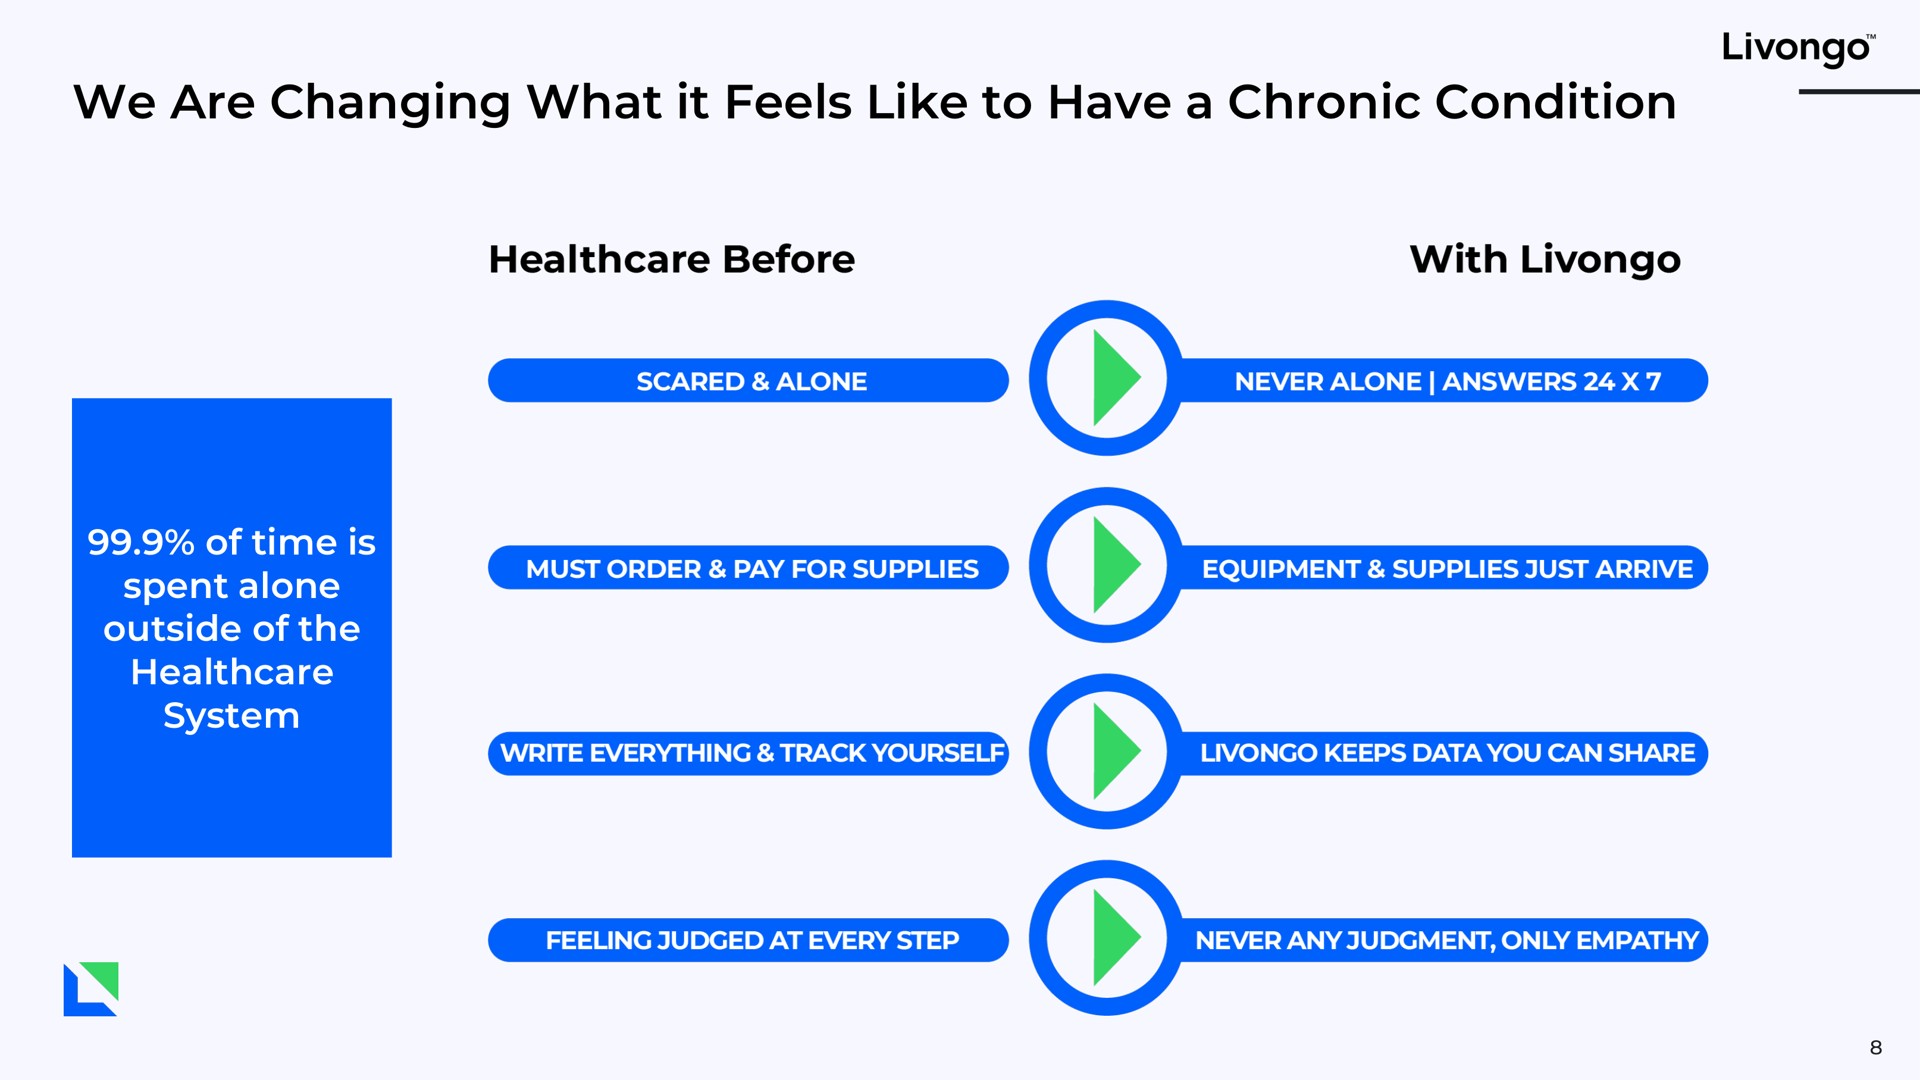 we are changing what it feels like to have a chronic condition | Livongo